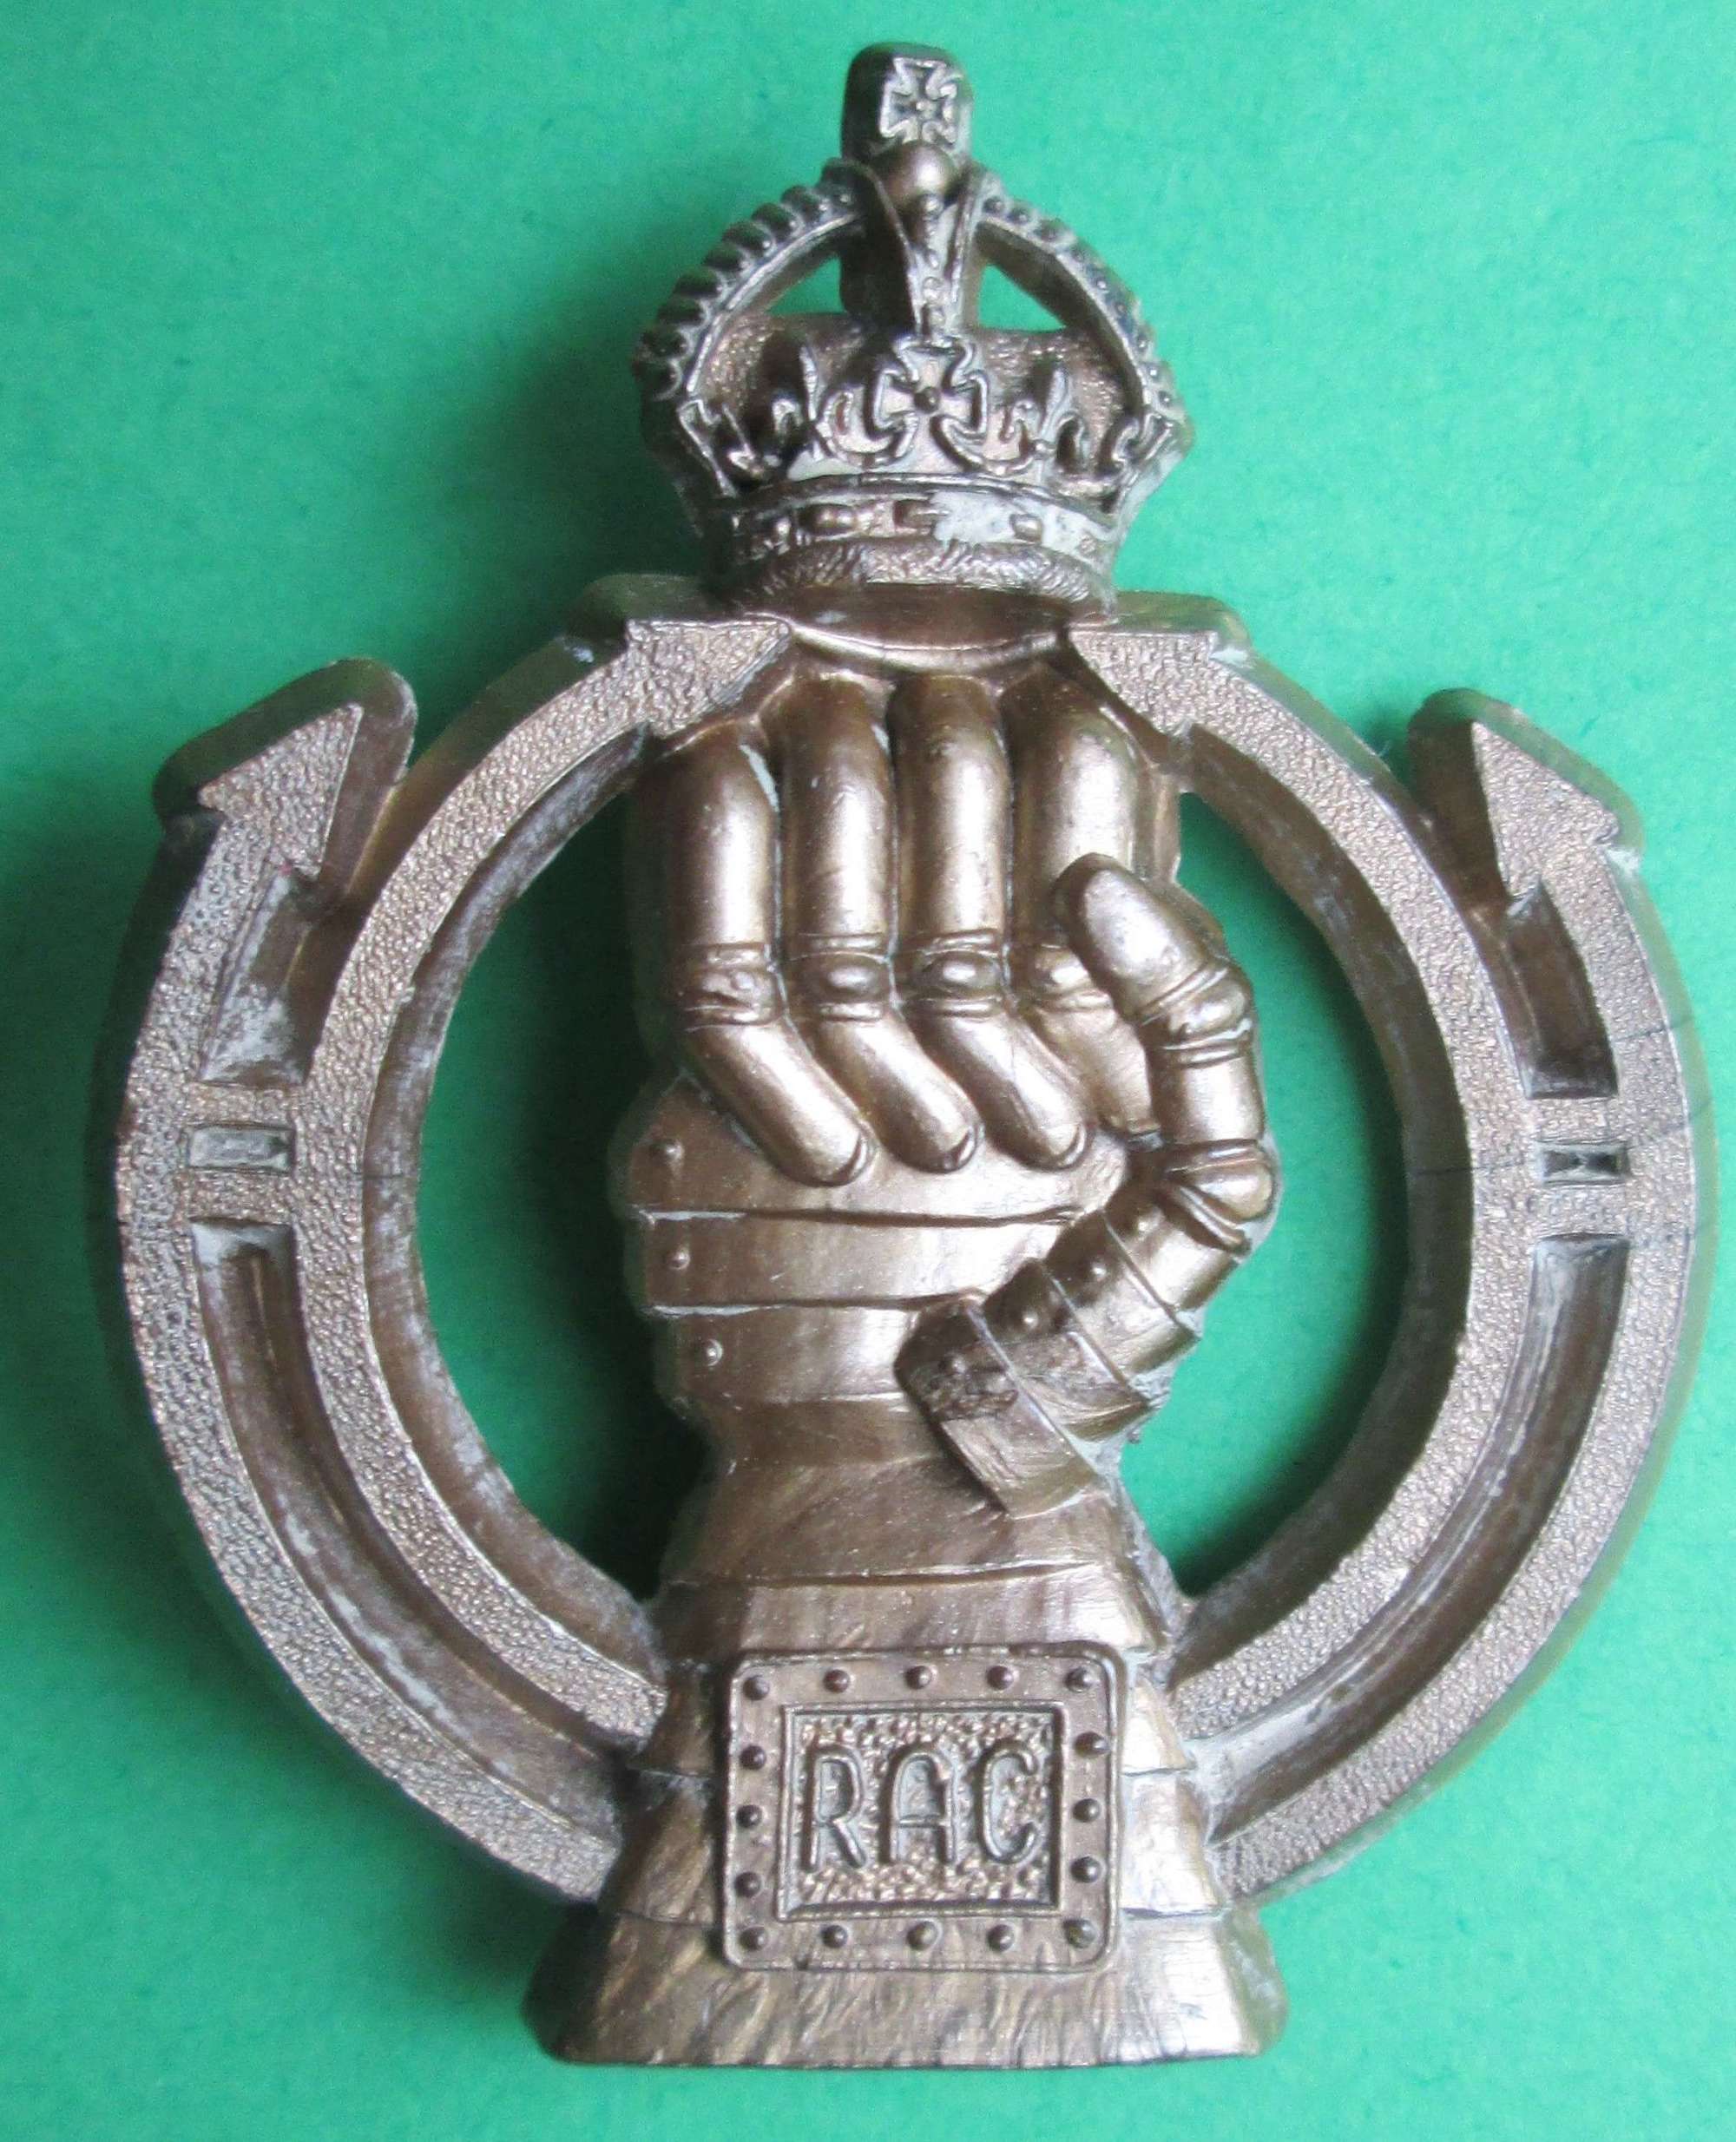 A ROYAL ARMOURED CORPS PLASTIC CAP BADGE